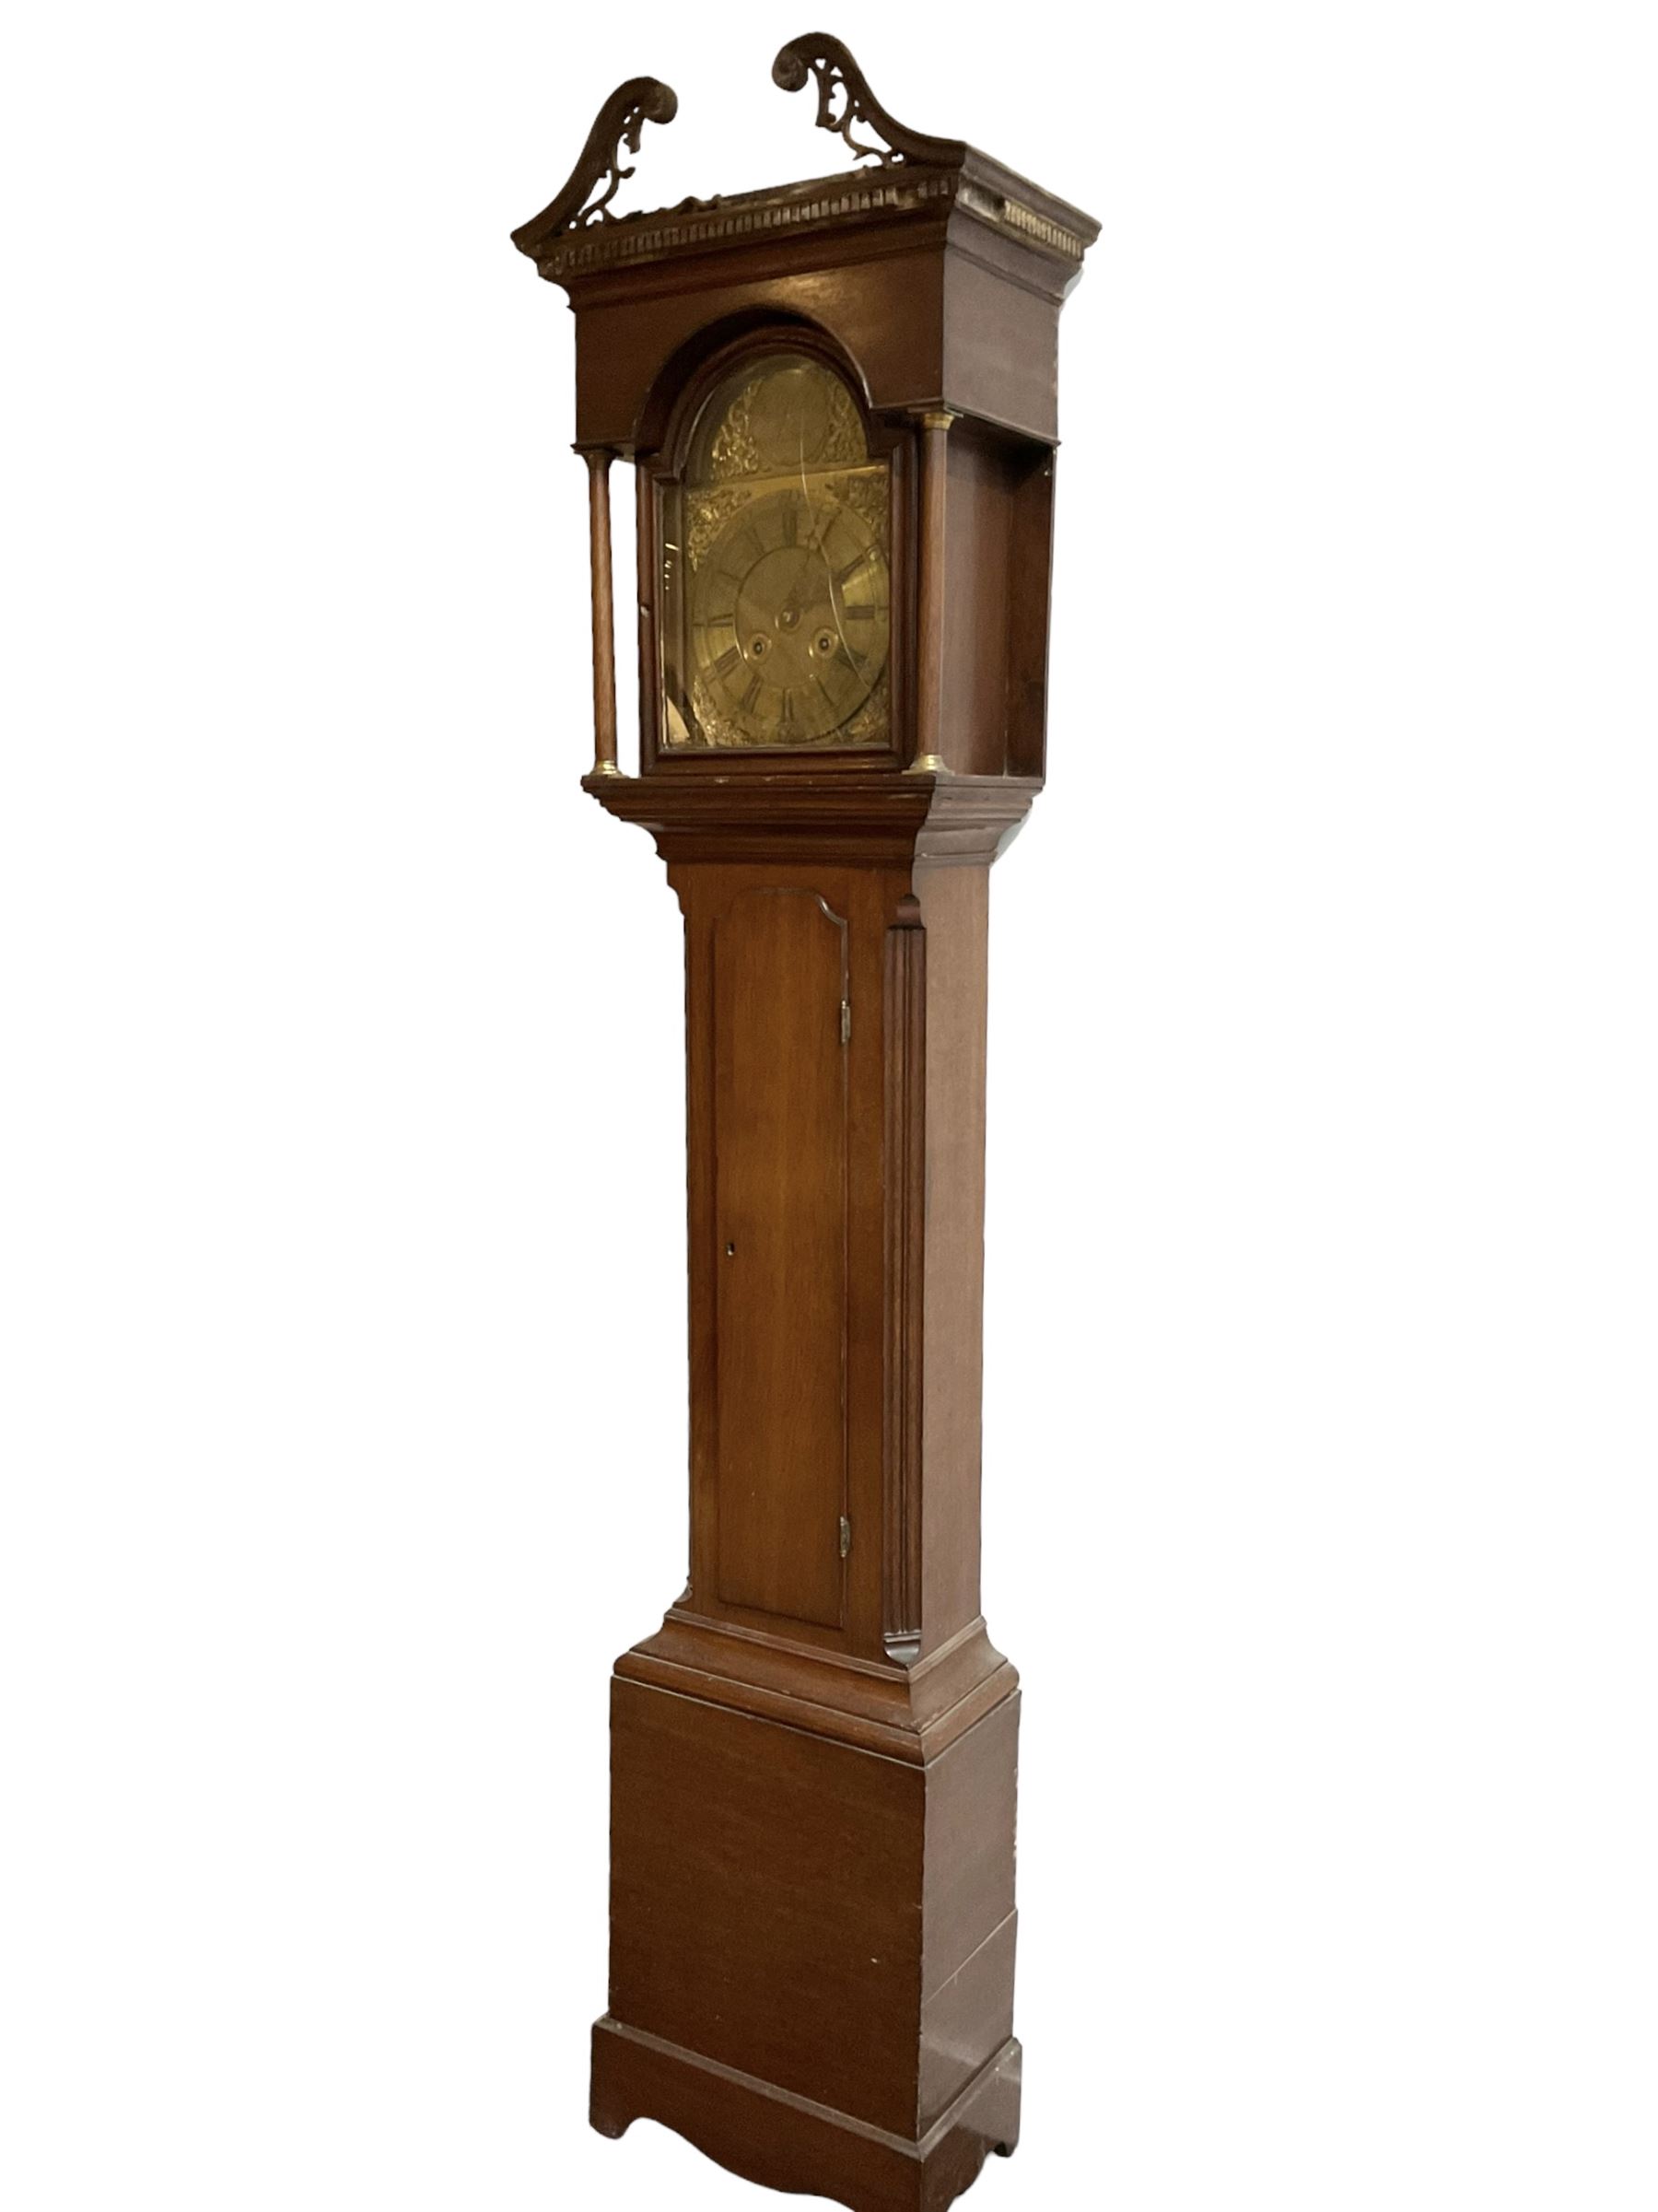 Unusual and rare 18th century key-wound two train 30-hour mahogany longcase clock - with a swans nec - Image 2 of 8